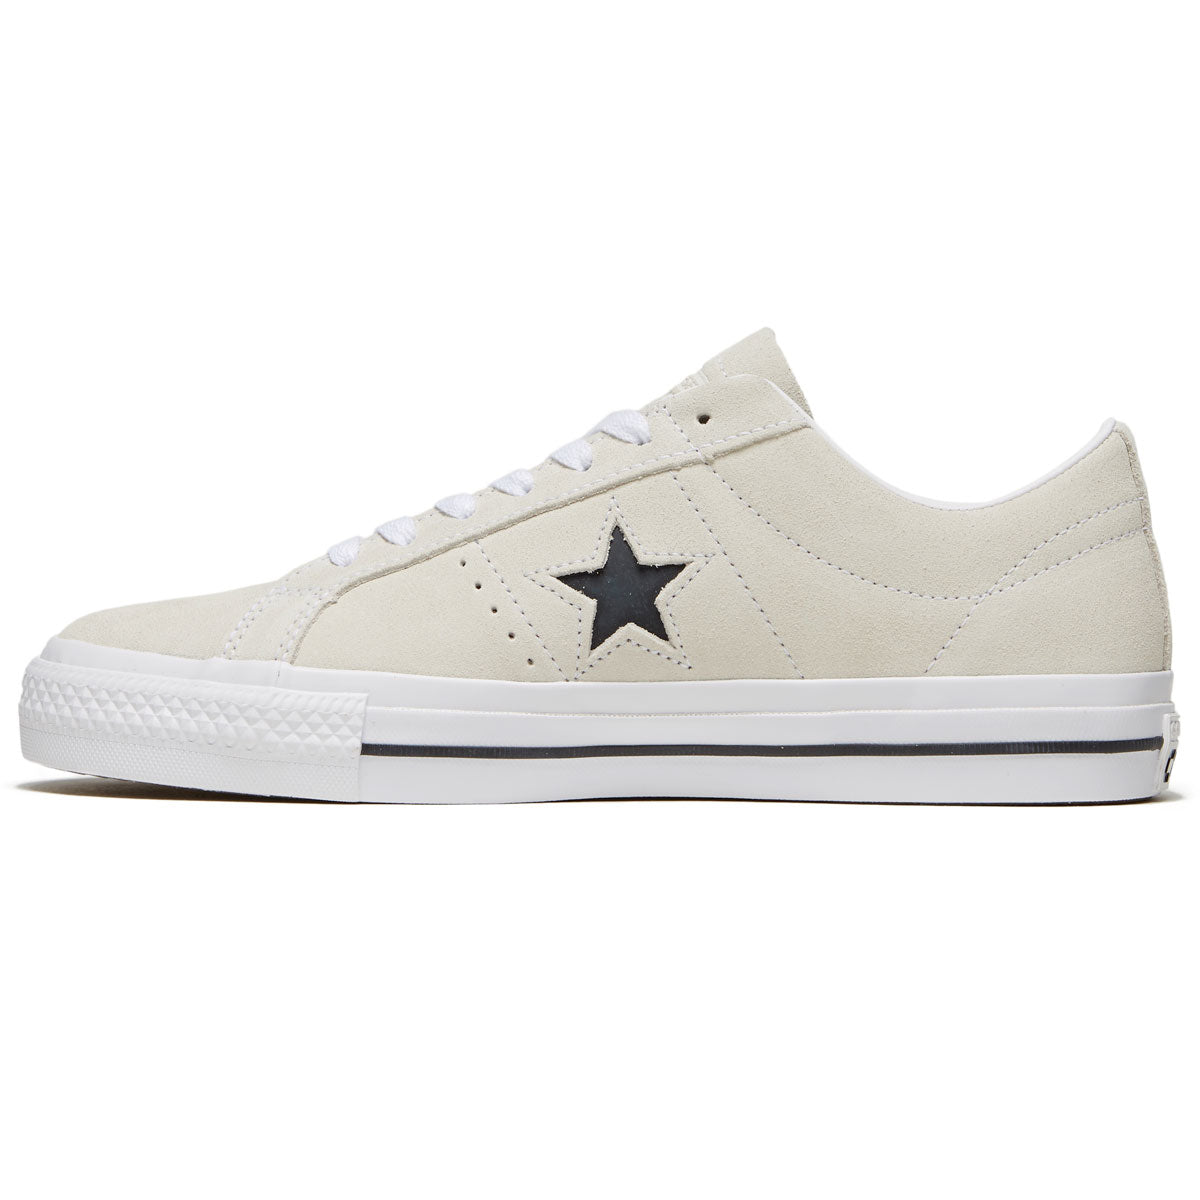 Converse One Star Pro Suede Shoes - Egret/White/Black image 2